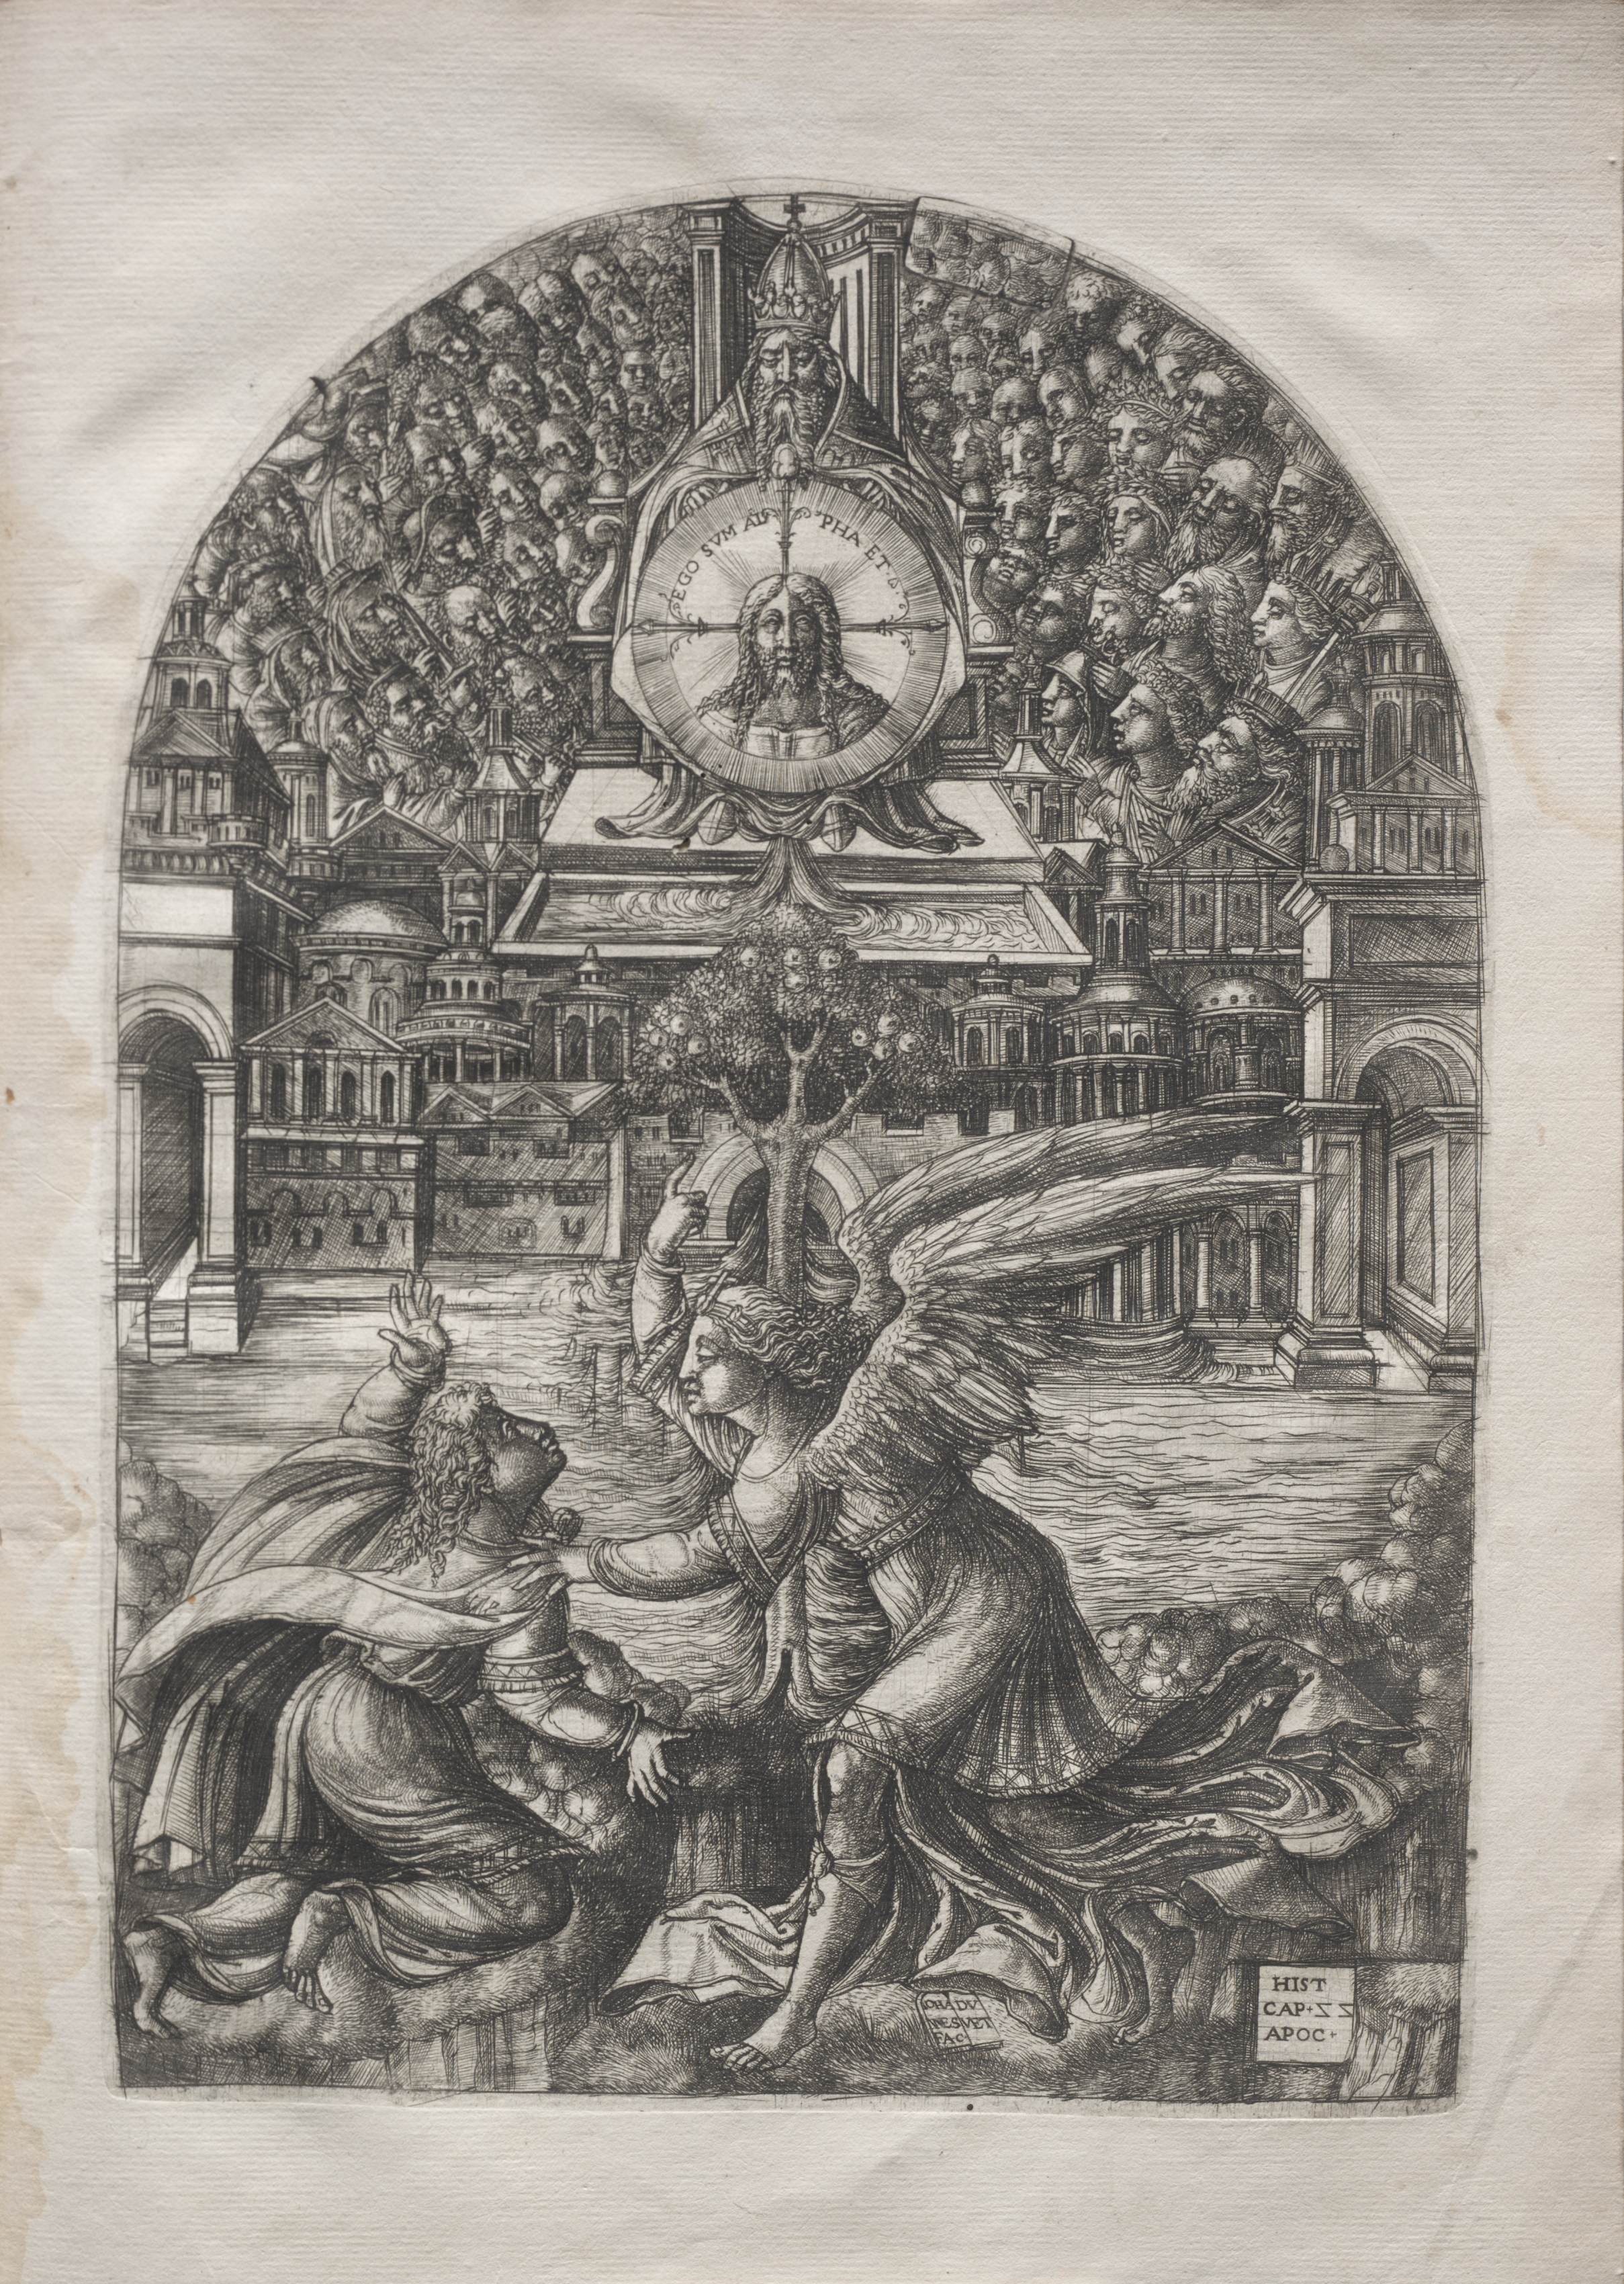 The Apocalypse:  The Angel Shows St. John the Fountain of Living Water